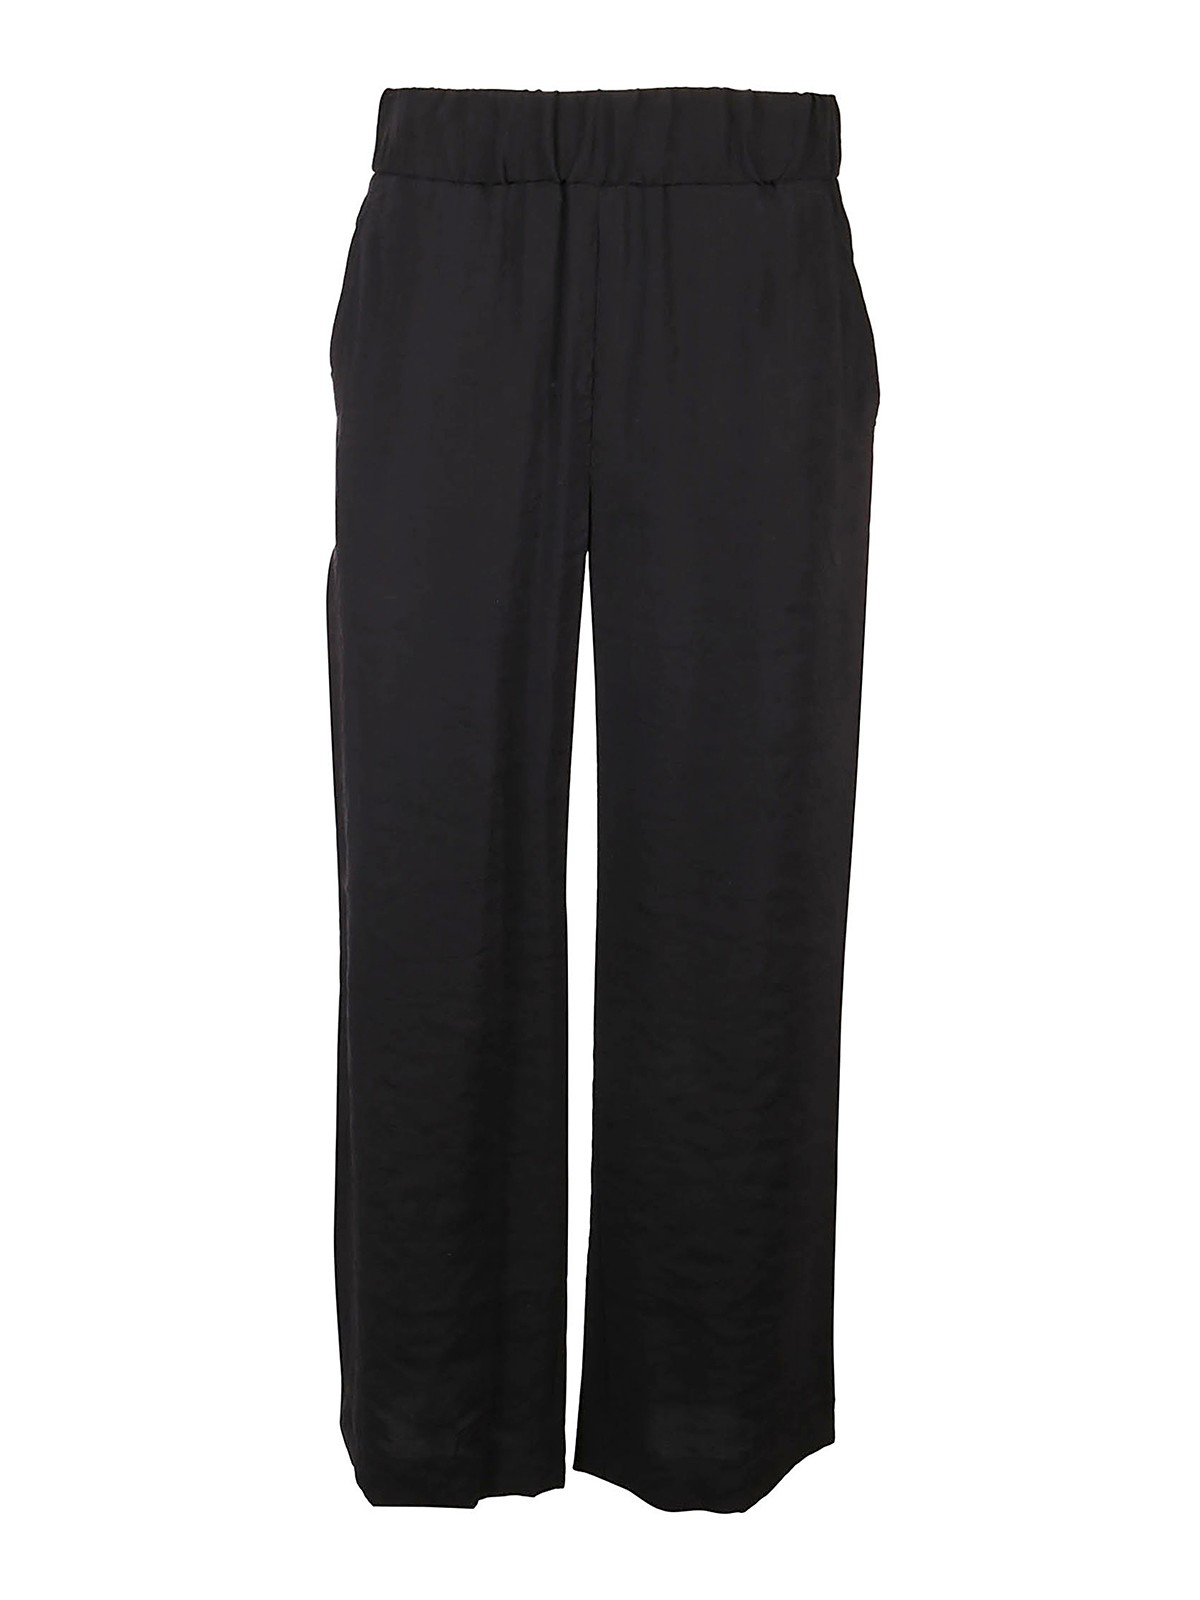 FAY PEACHED EFFECT PANTS